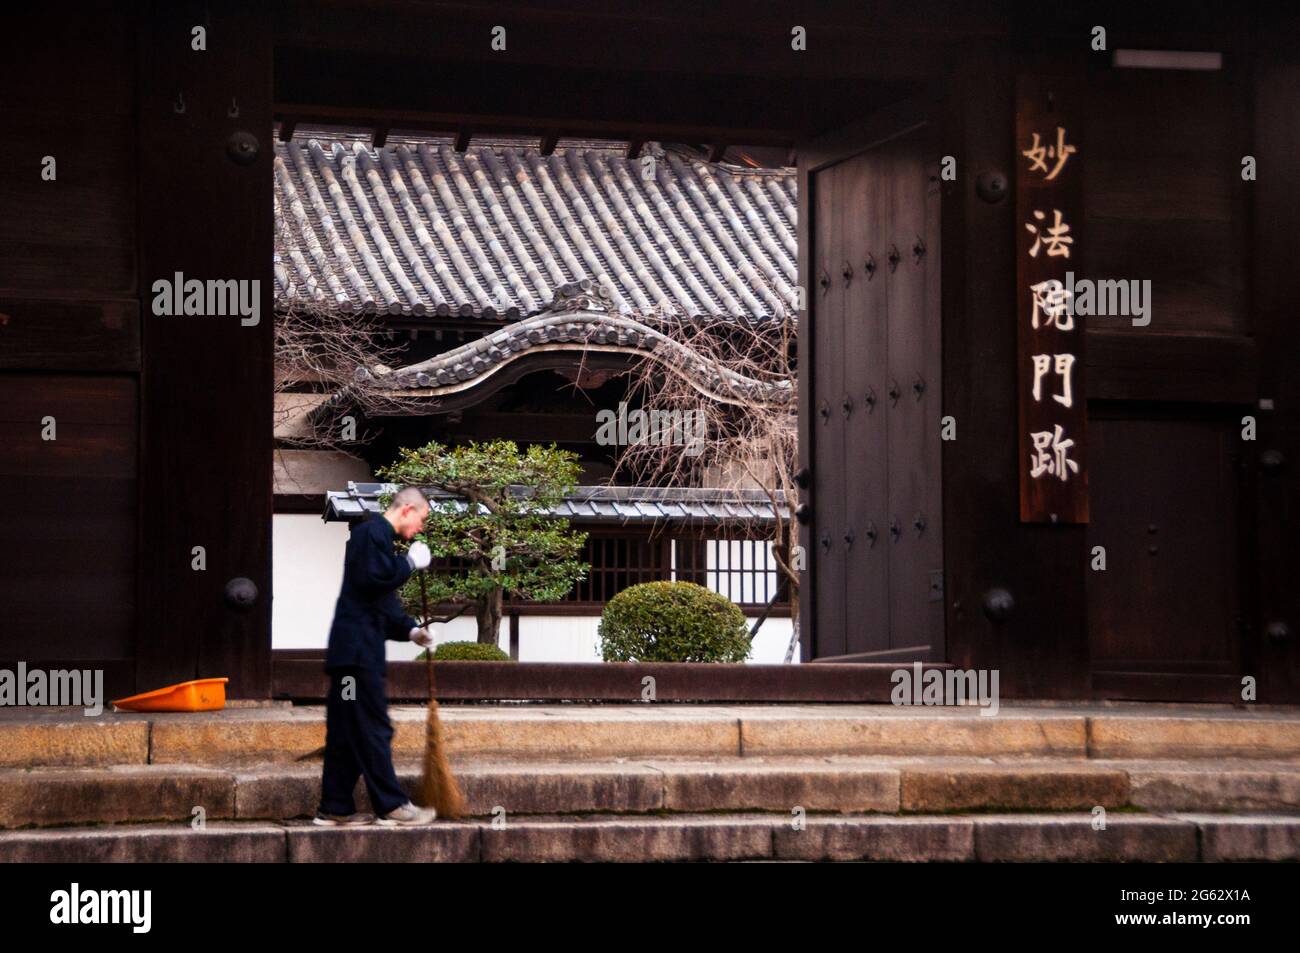 Morning chores outside the gate of a Buddhist temple in Kyoto, Japan. Stock Photo